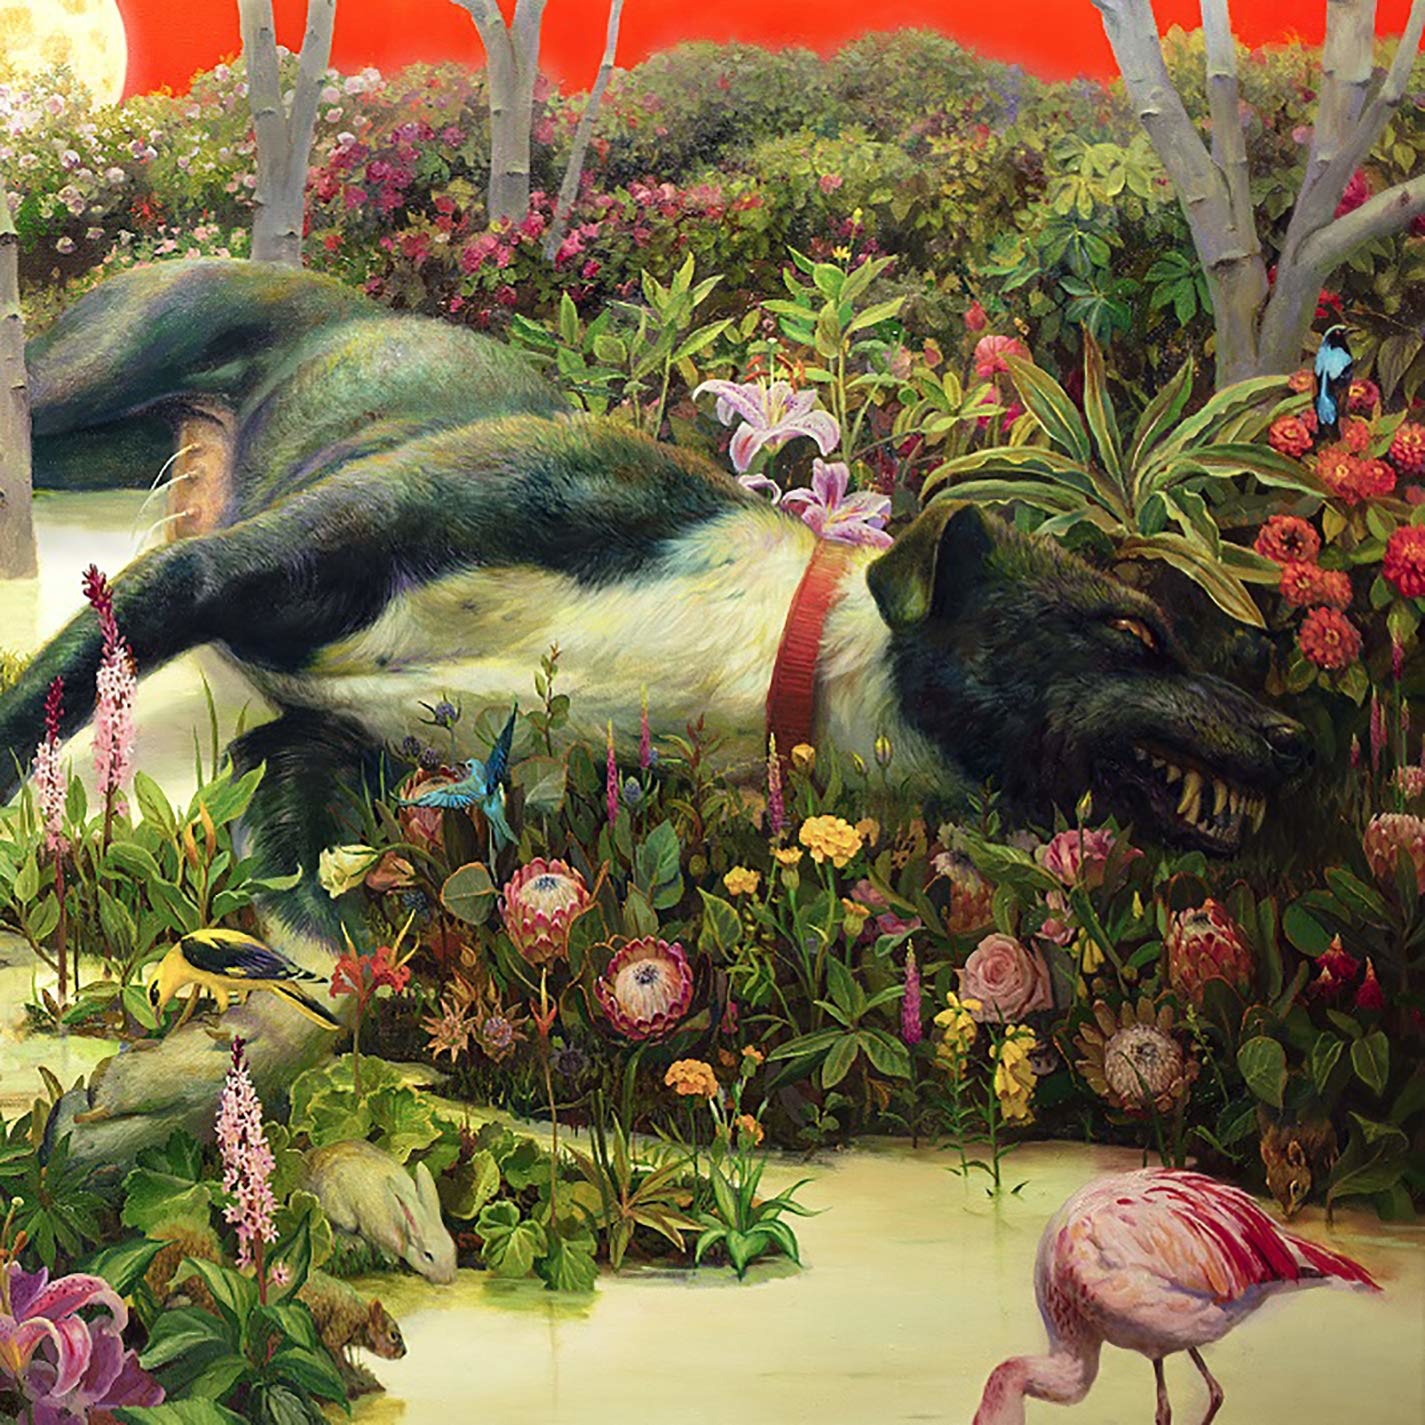 Rival Sons Rival Sons "Feral Roots" [LP]